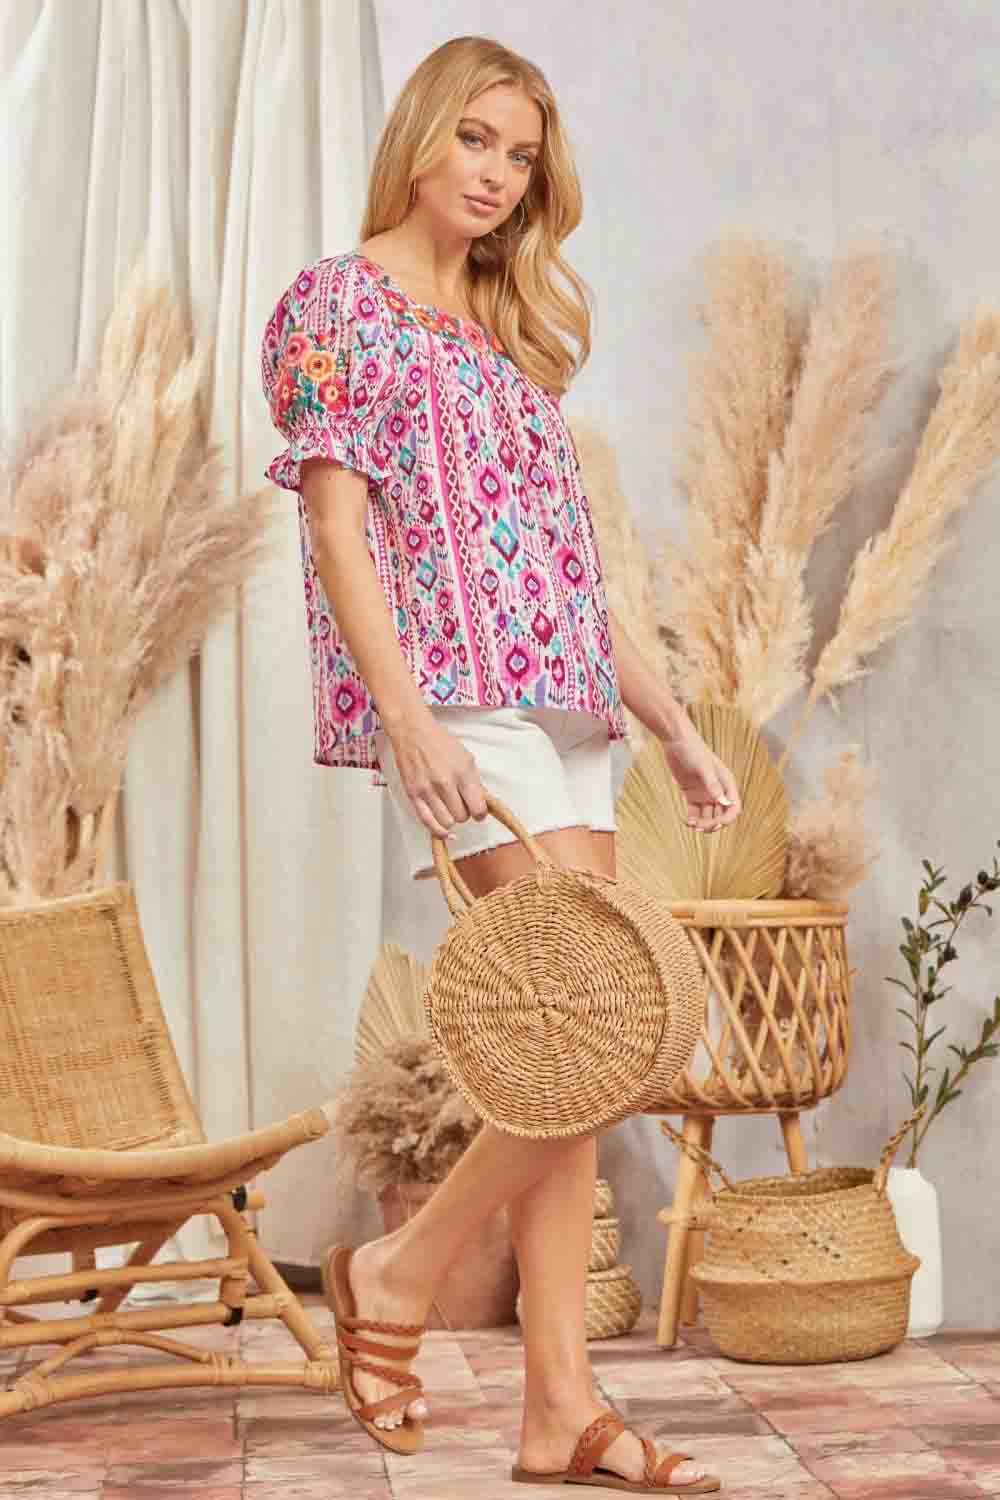 Aztec and Floral Embroidered Shirt by Savanna Jane